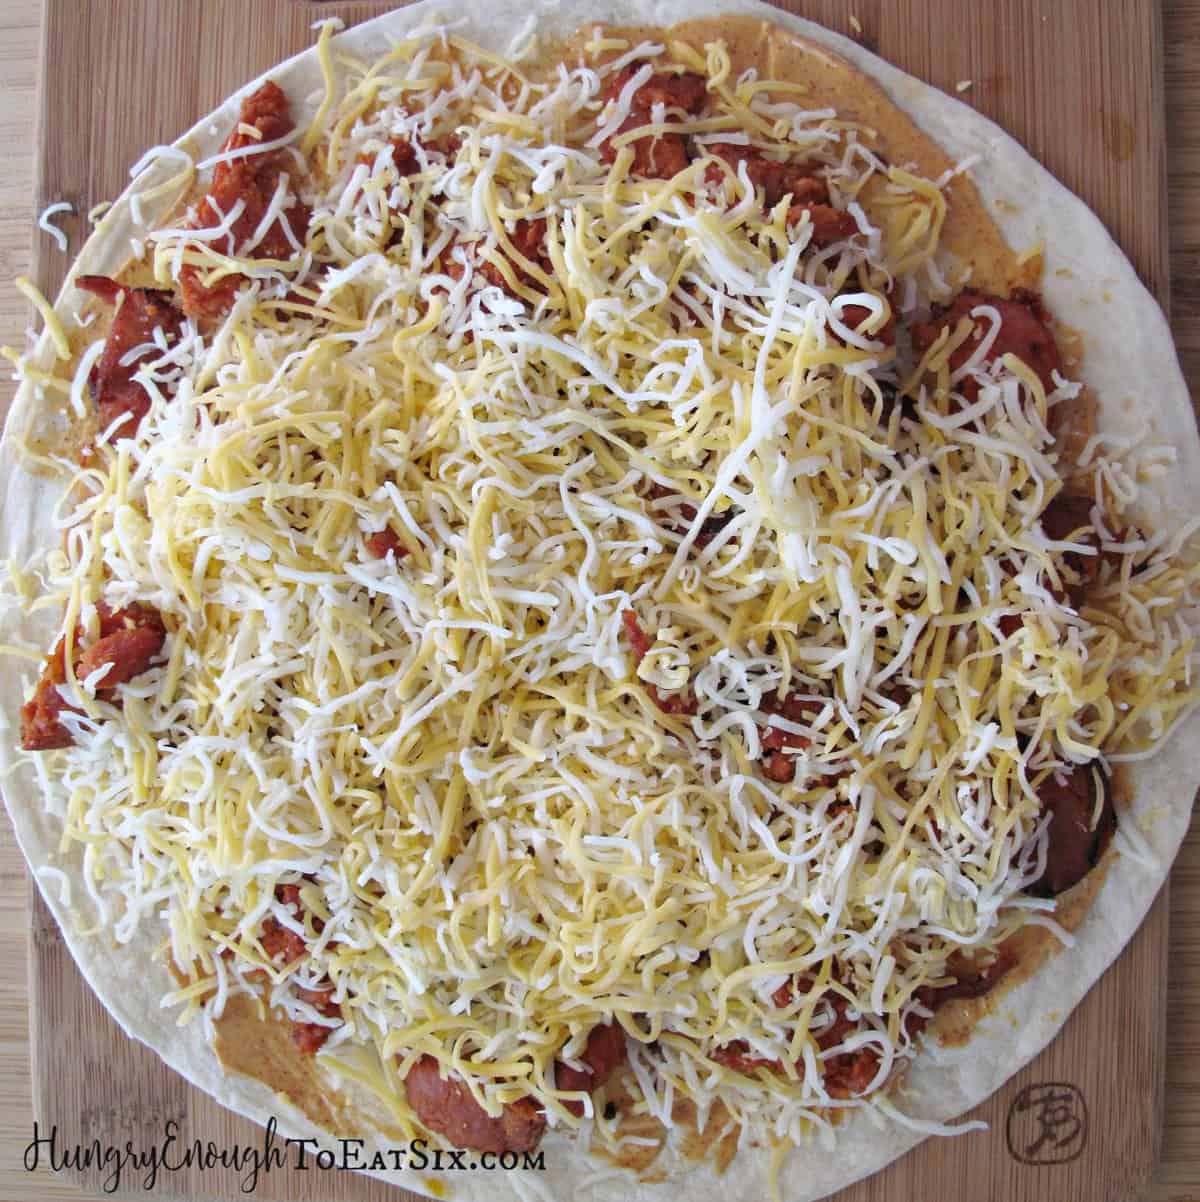 Tortilla topped with meat and shredded cheese.